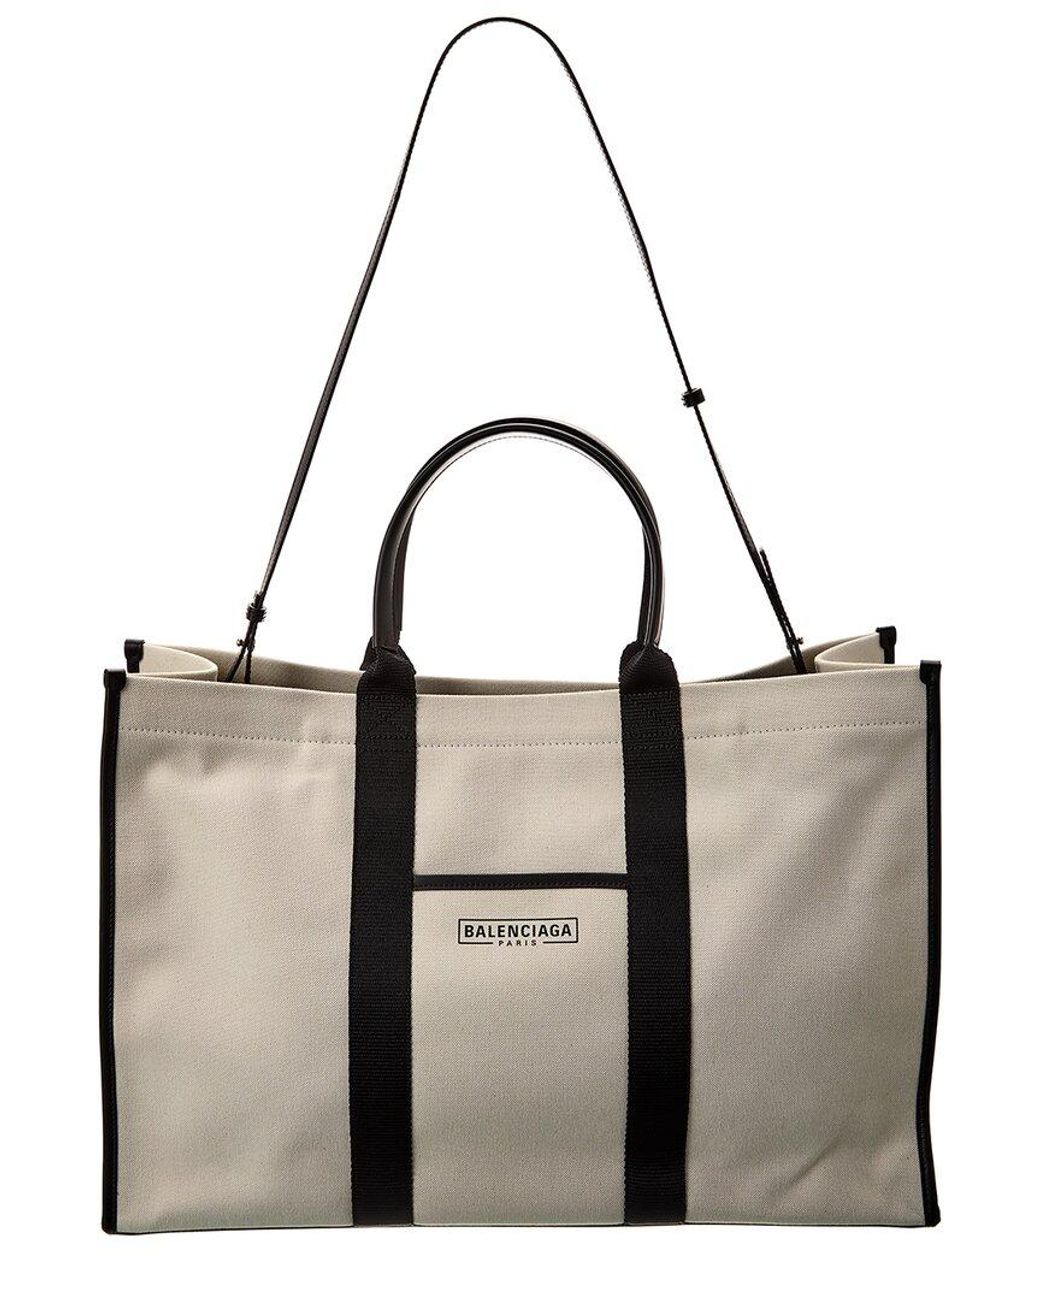 Balenciaga Hardware Large Canvas & Leather Tote in White | Lyst